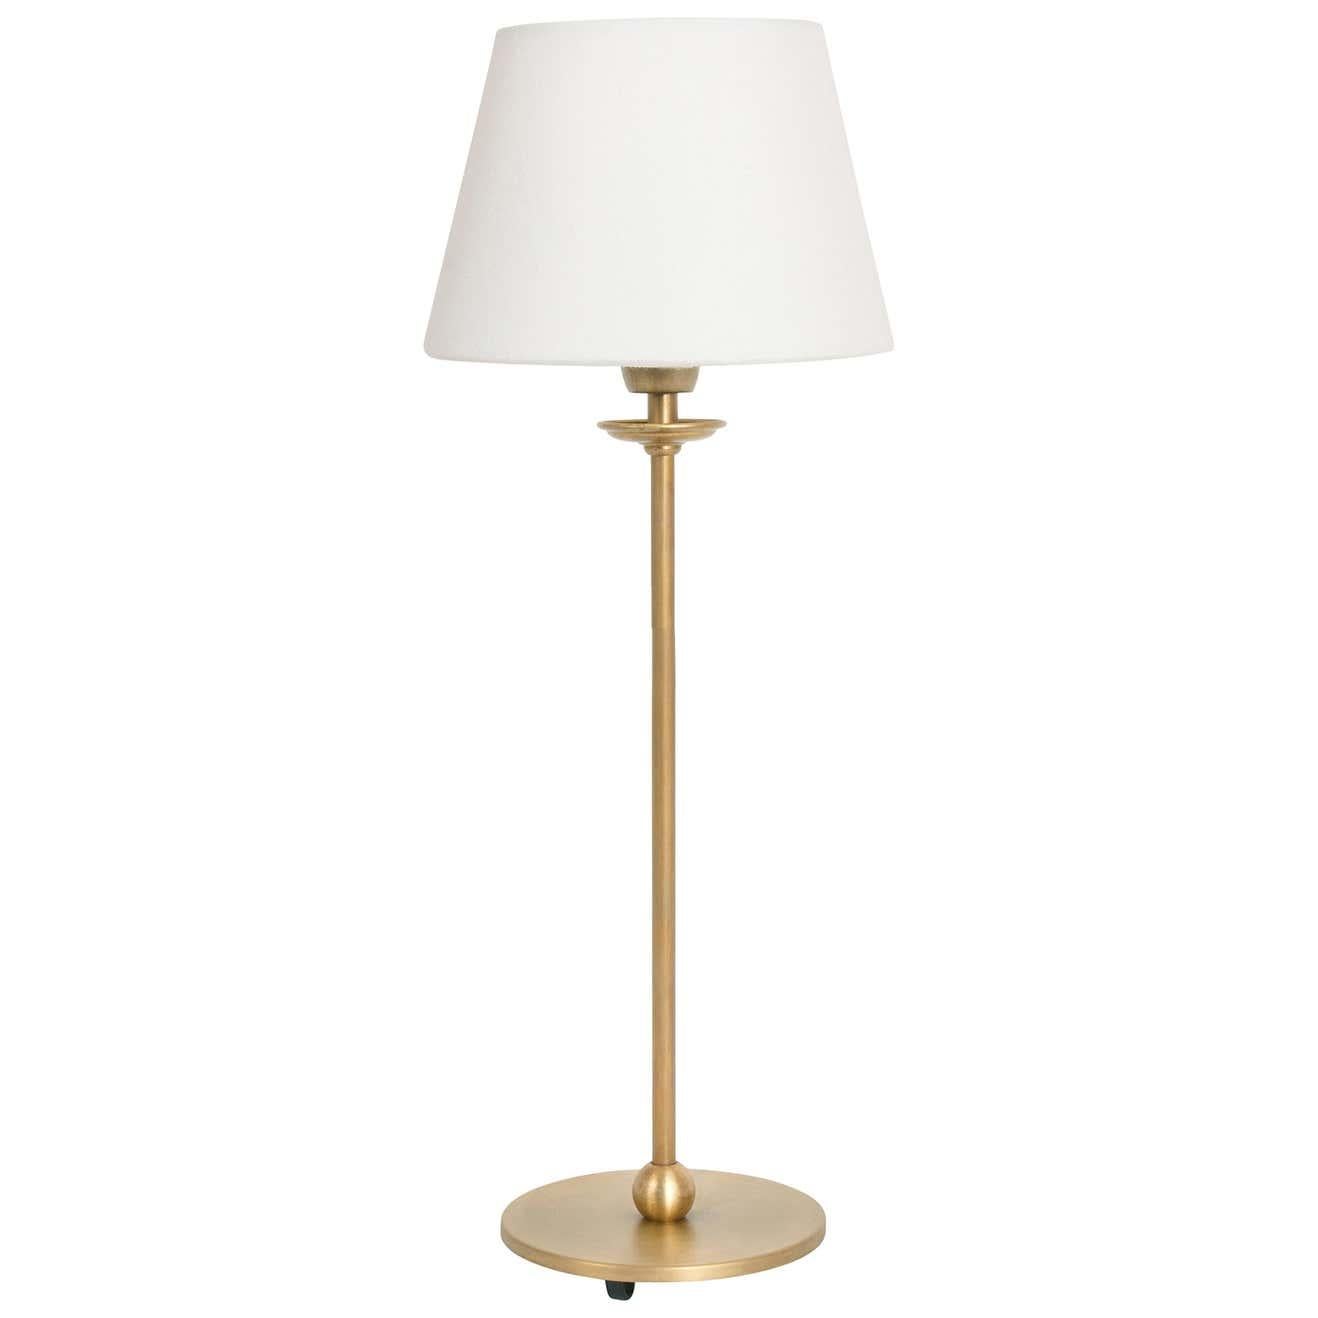 Lamp model Uno medium raw brass table lamp designed by Konsthantverk and manufactured by themselves.

The production of lamps, wall lights and floor lamps are manufactured using craftsman’s techniques with the same materials and techniques as the